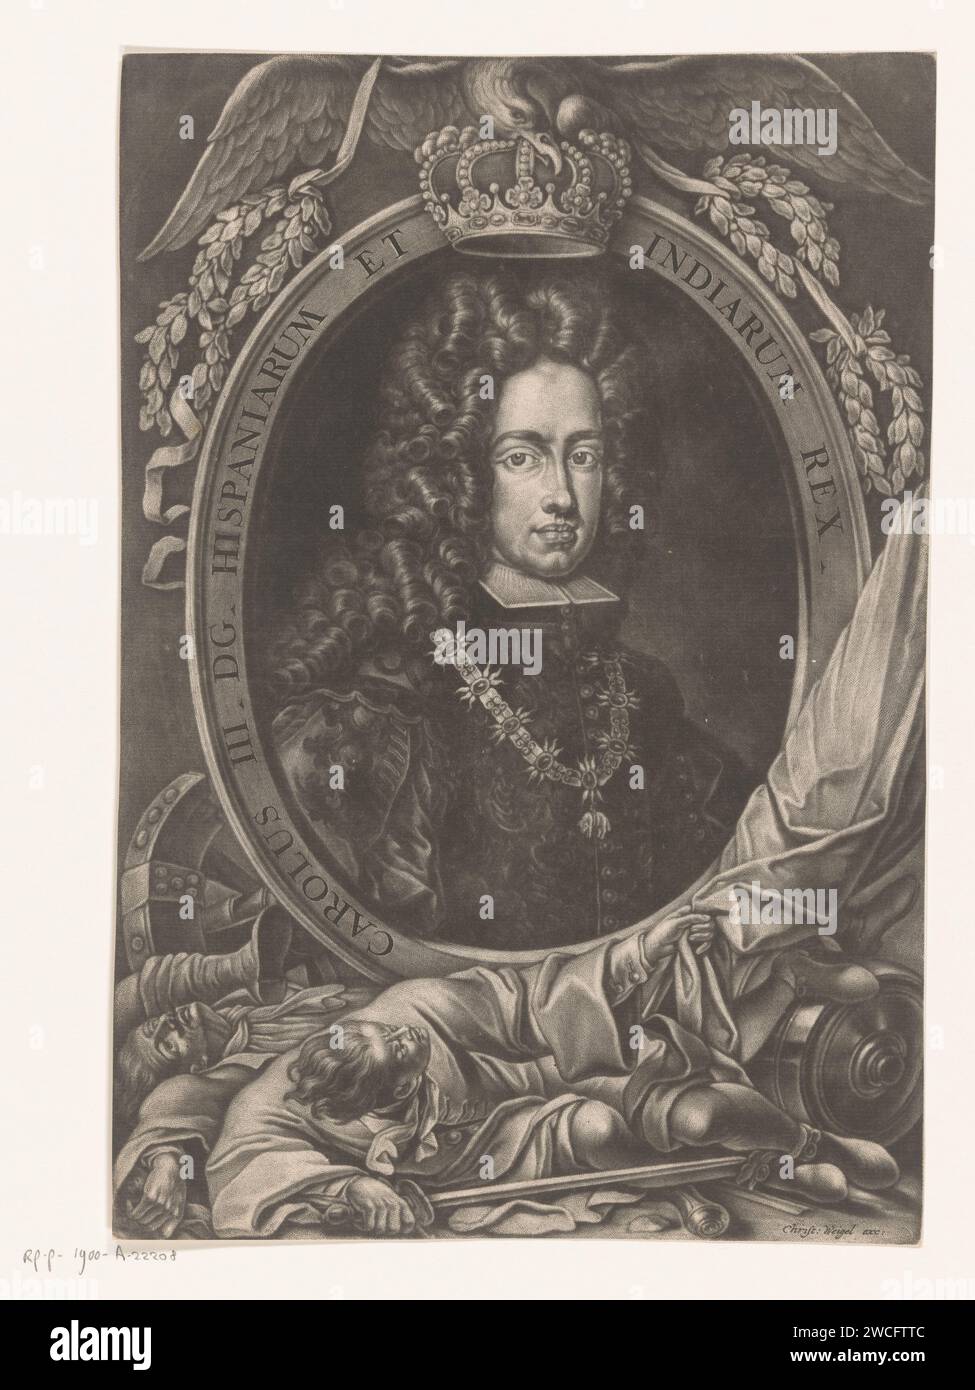 Portrait of Charles VI, Emperor of the Holy Roman Empire, Christoph Weigel, 1695 - 1725 print   paper  historical persons Stock Photo